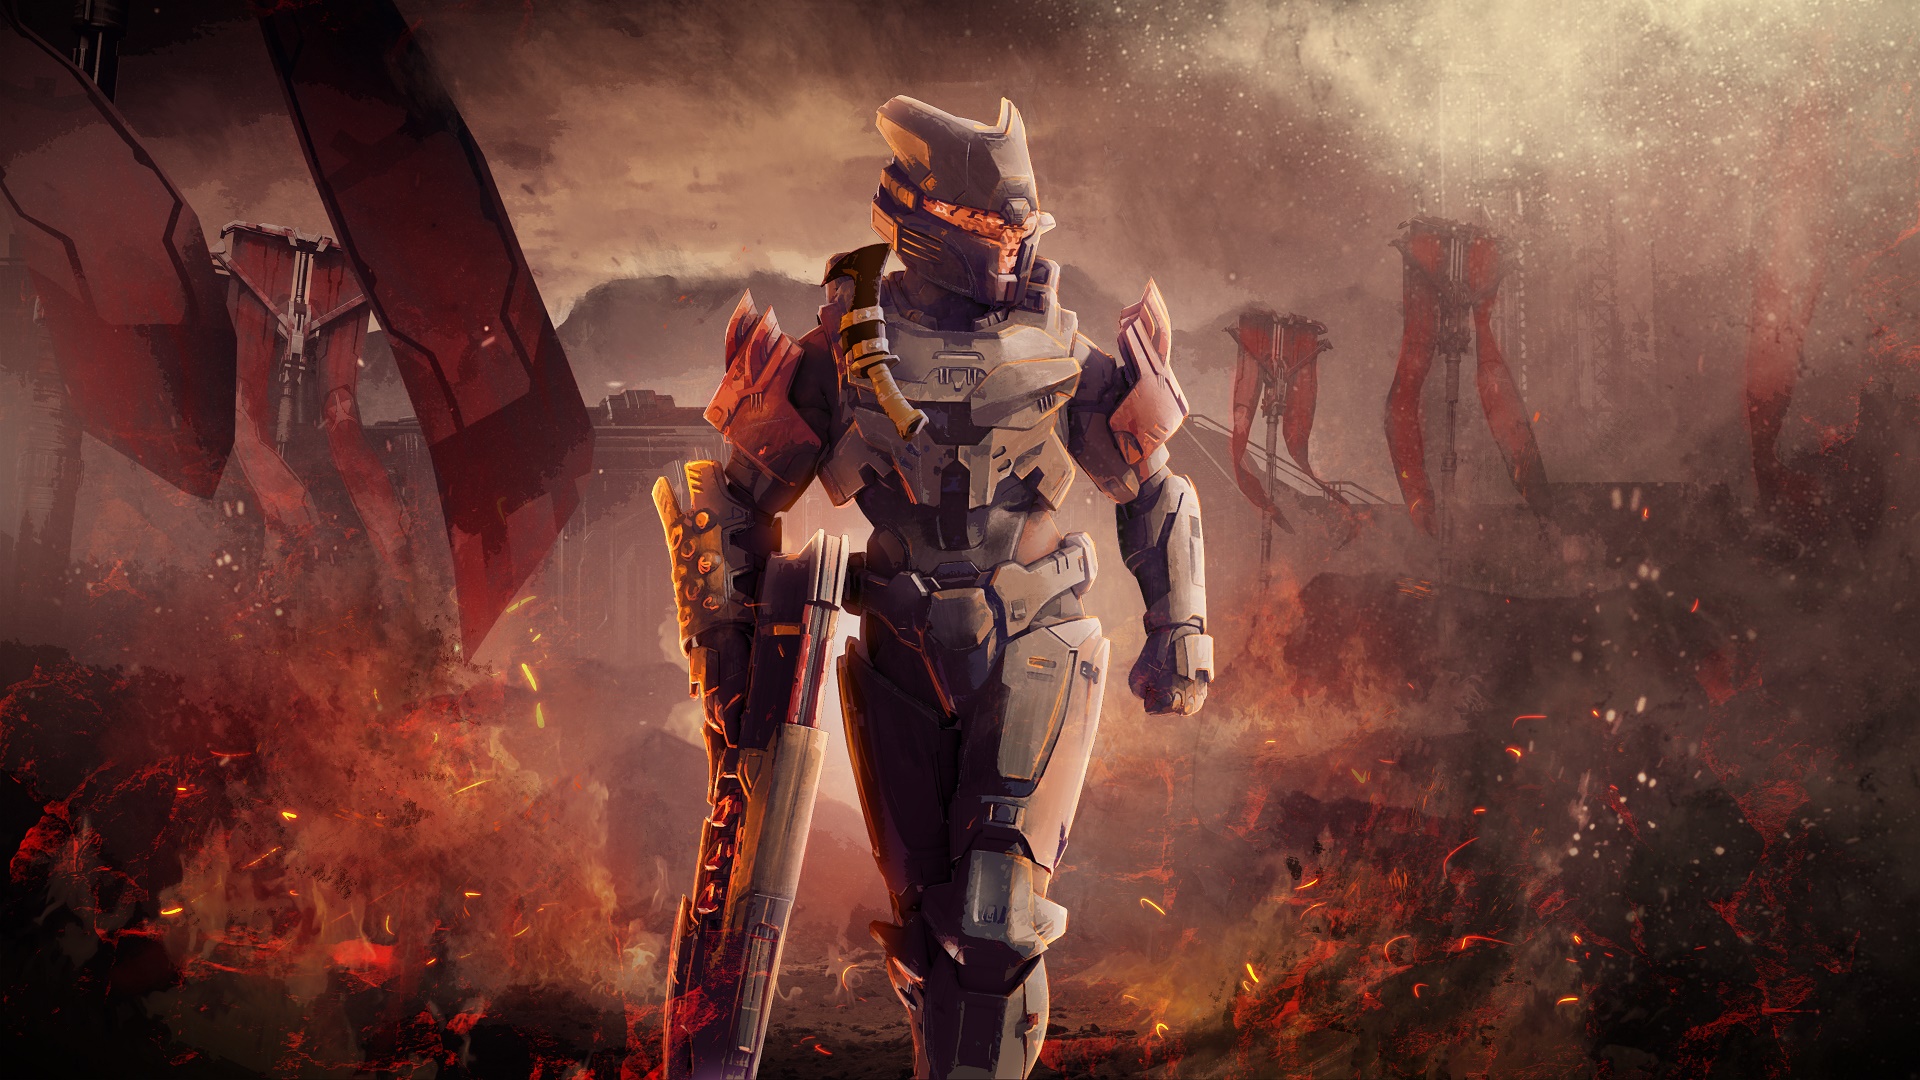 Halo: The Third Life image depicting Ilsa Zane surrounded by fire and Banished banners